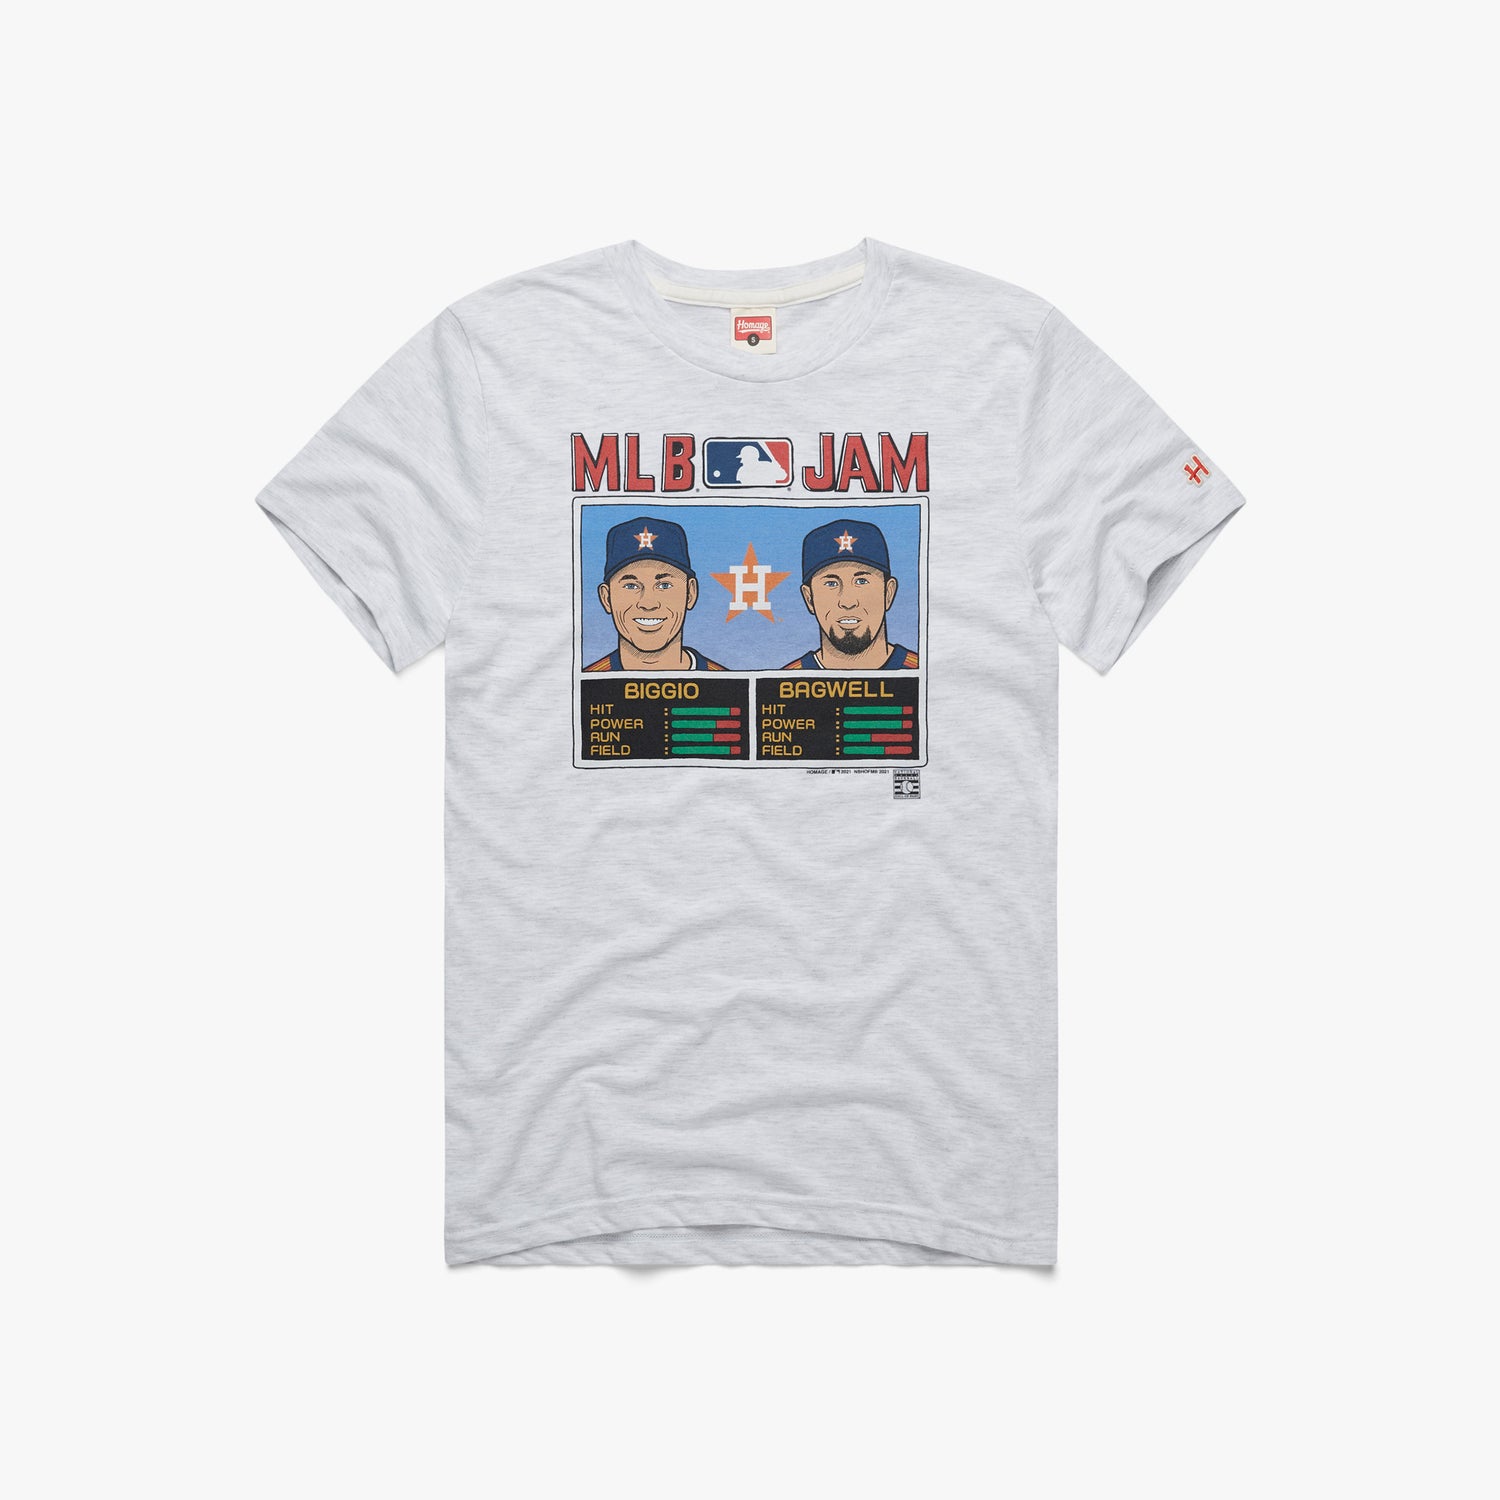 MLB Jam Astros Biggio and Bagwell T-Shirt from Homage. | Ash | Vintage Apparel from Homage.